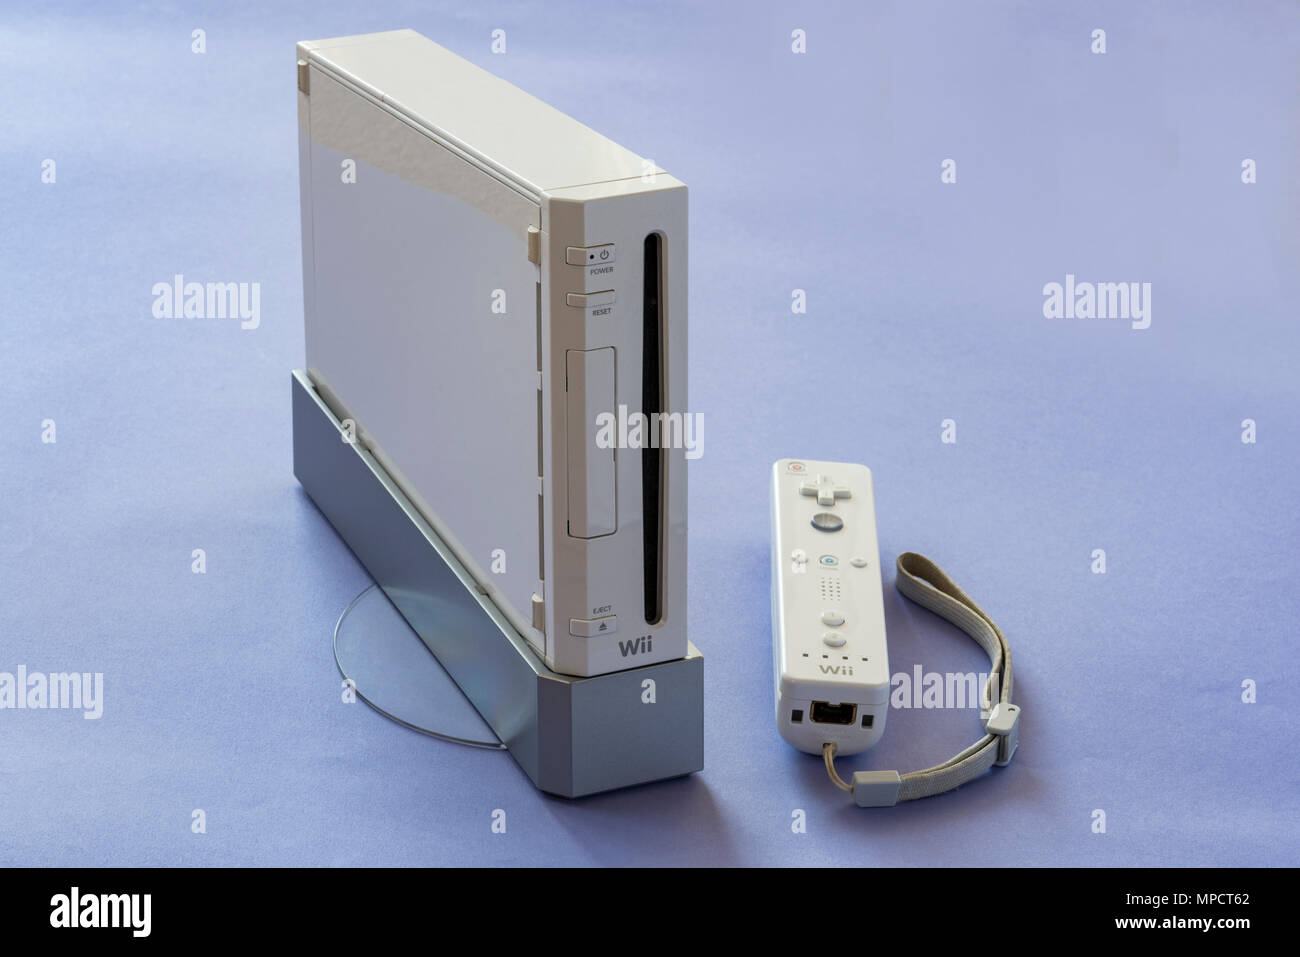 Nintendo Wii games console and hand controller. Stock Photo